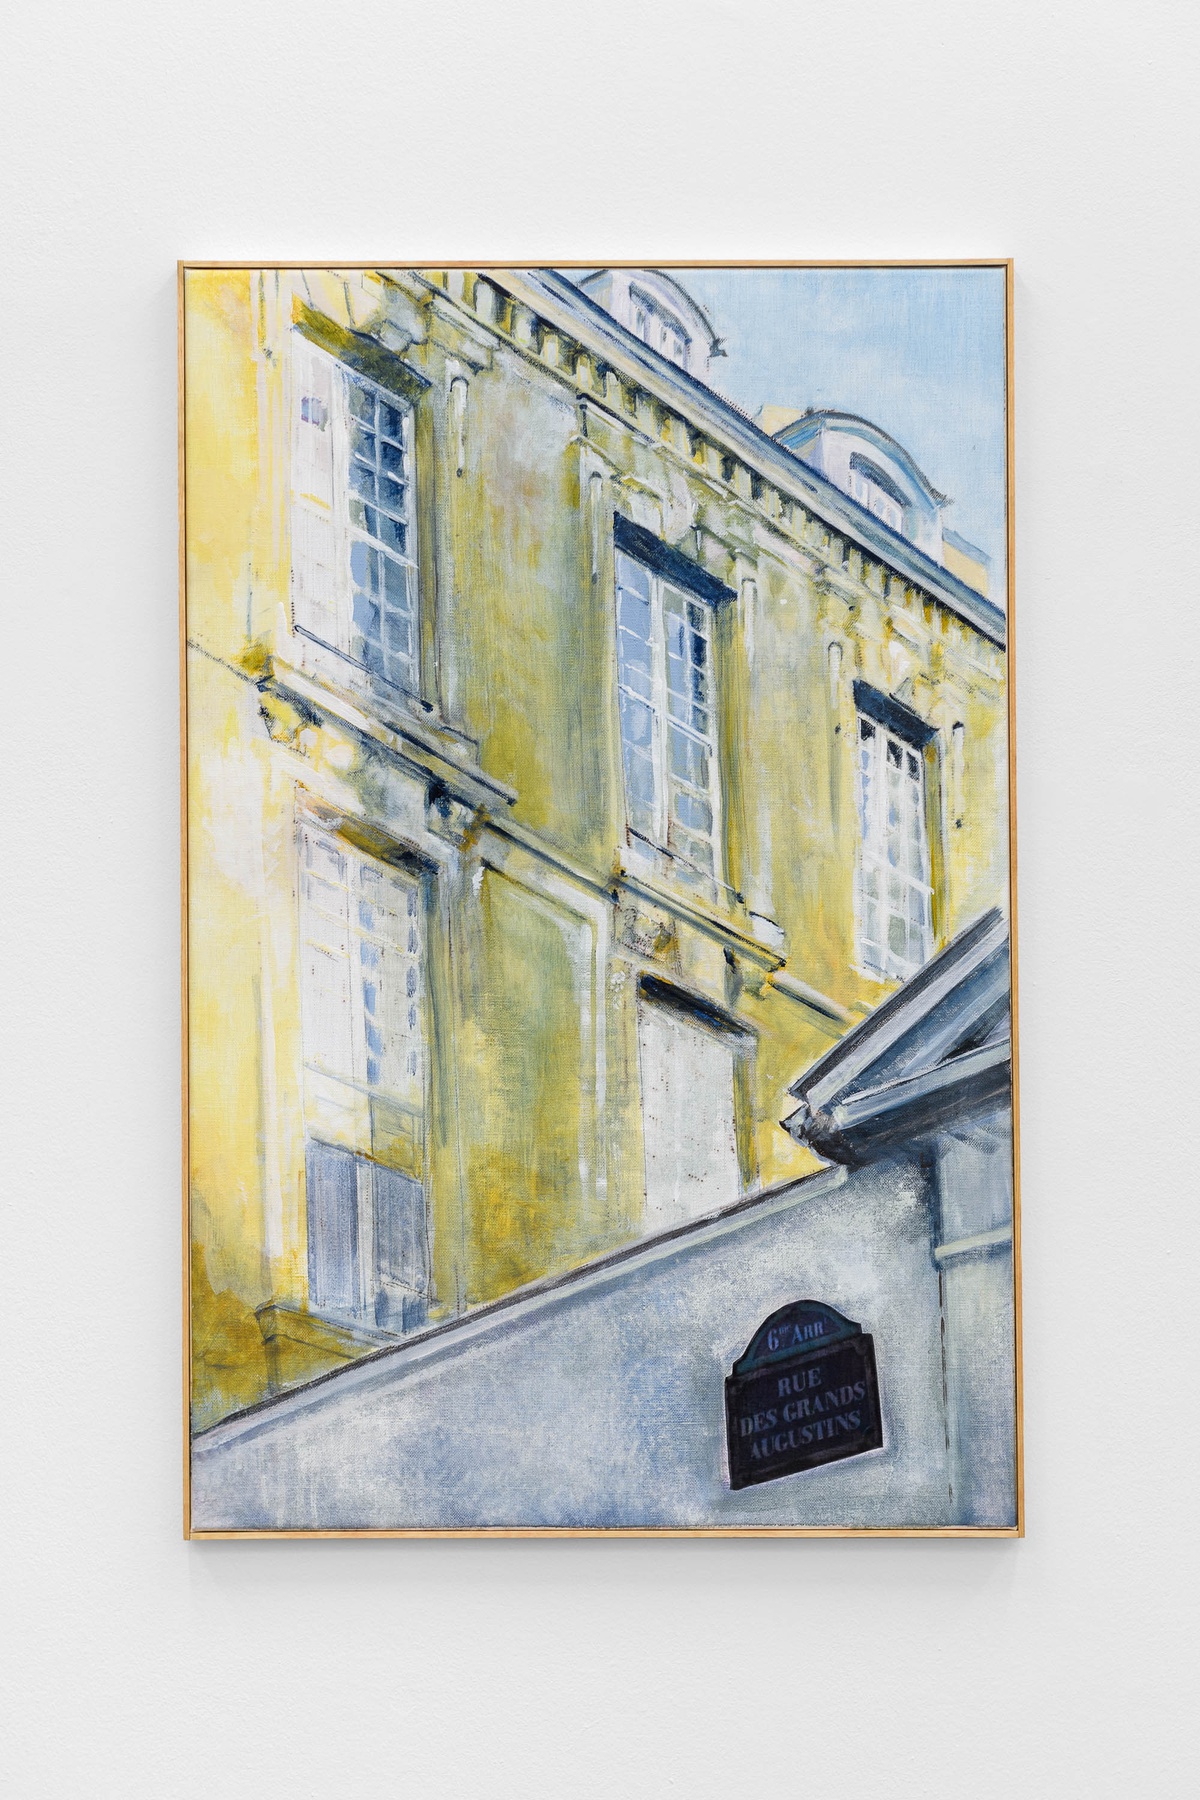 Ariane Müller7 Rue des Grands Augustins 5, 2023acrylic and paper on canvas65 × 100 cm